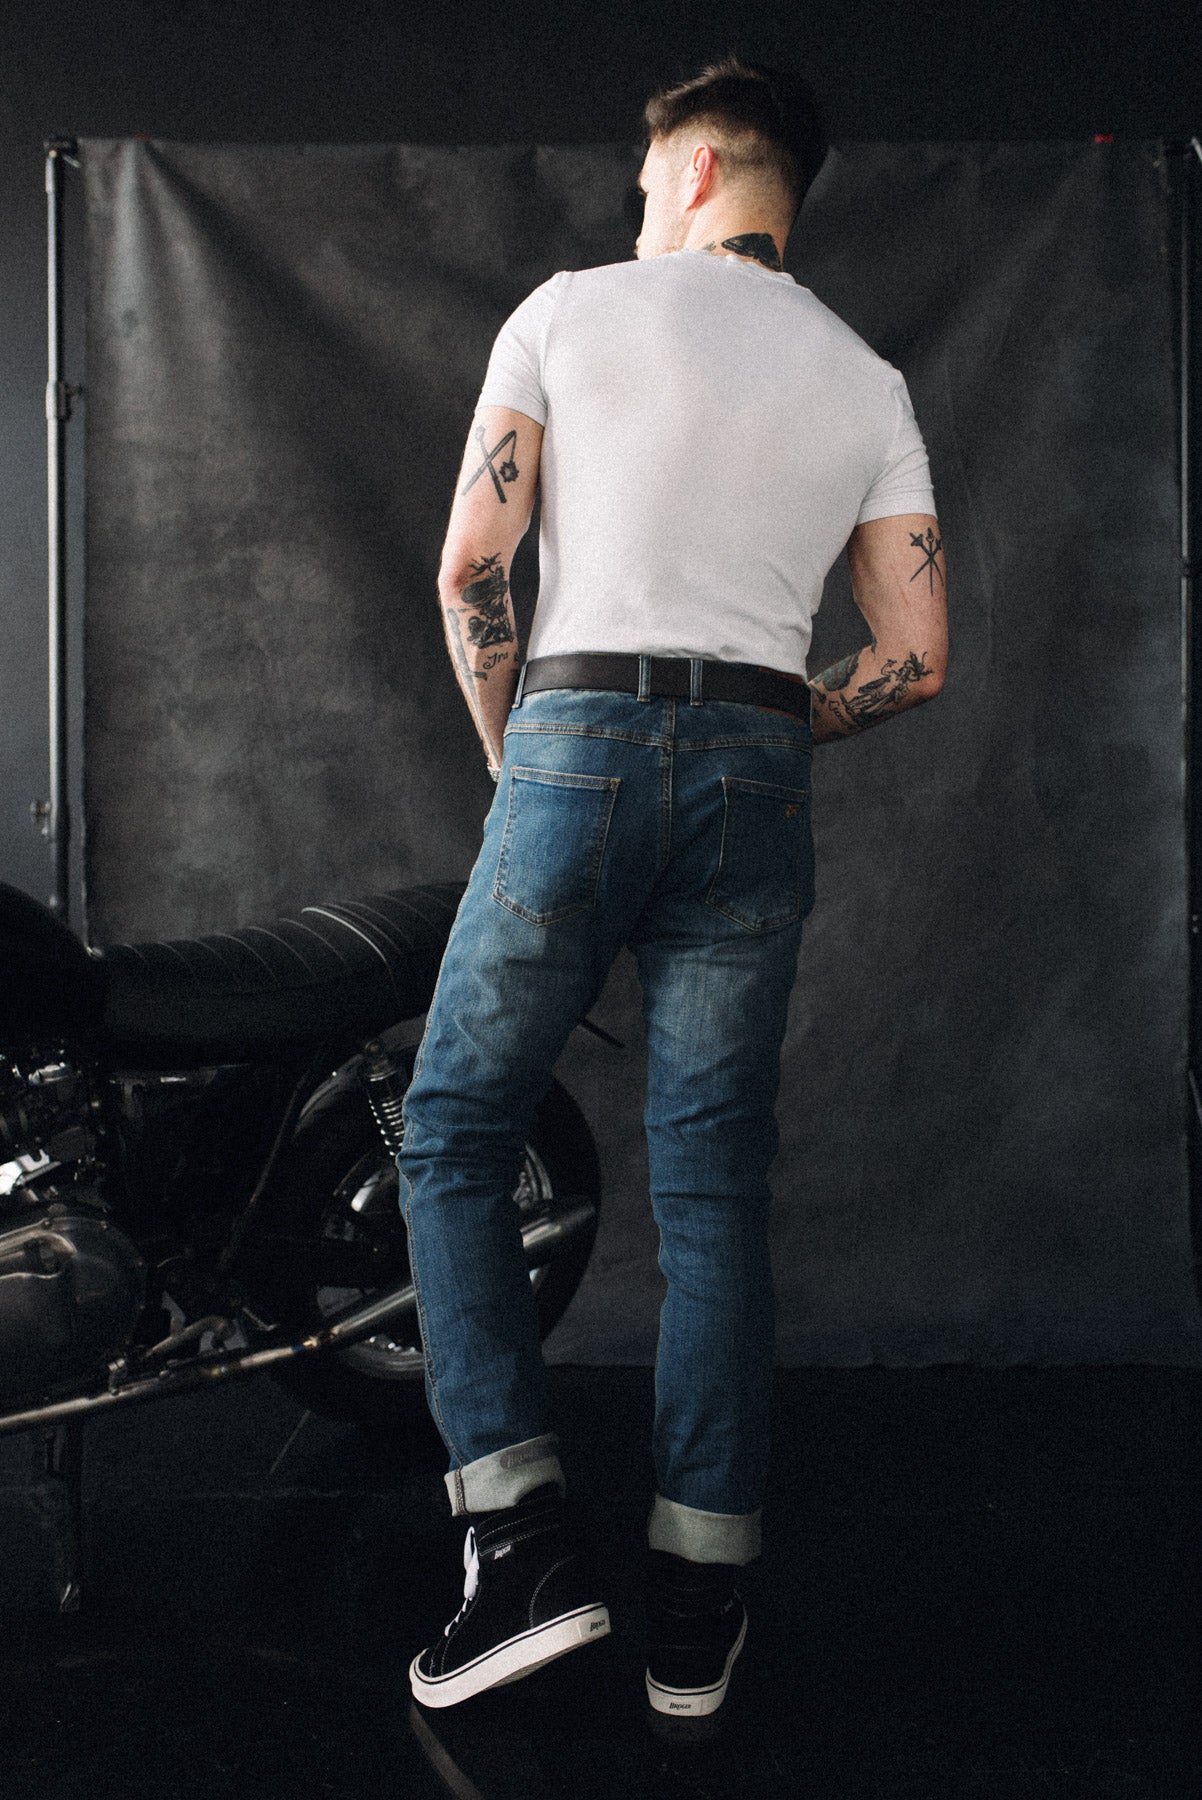 California Washed Blue Jeans - Slim Fit